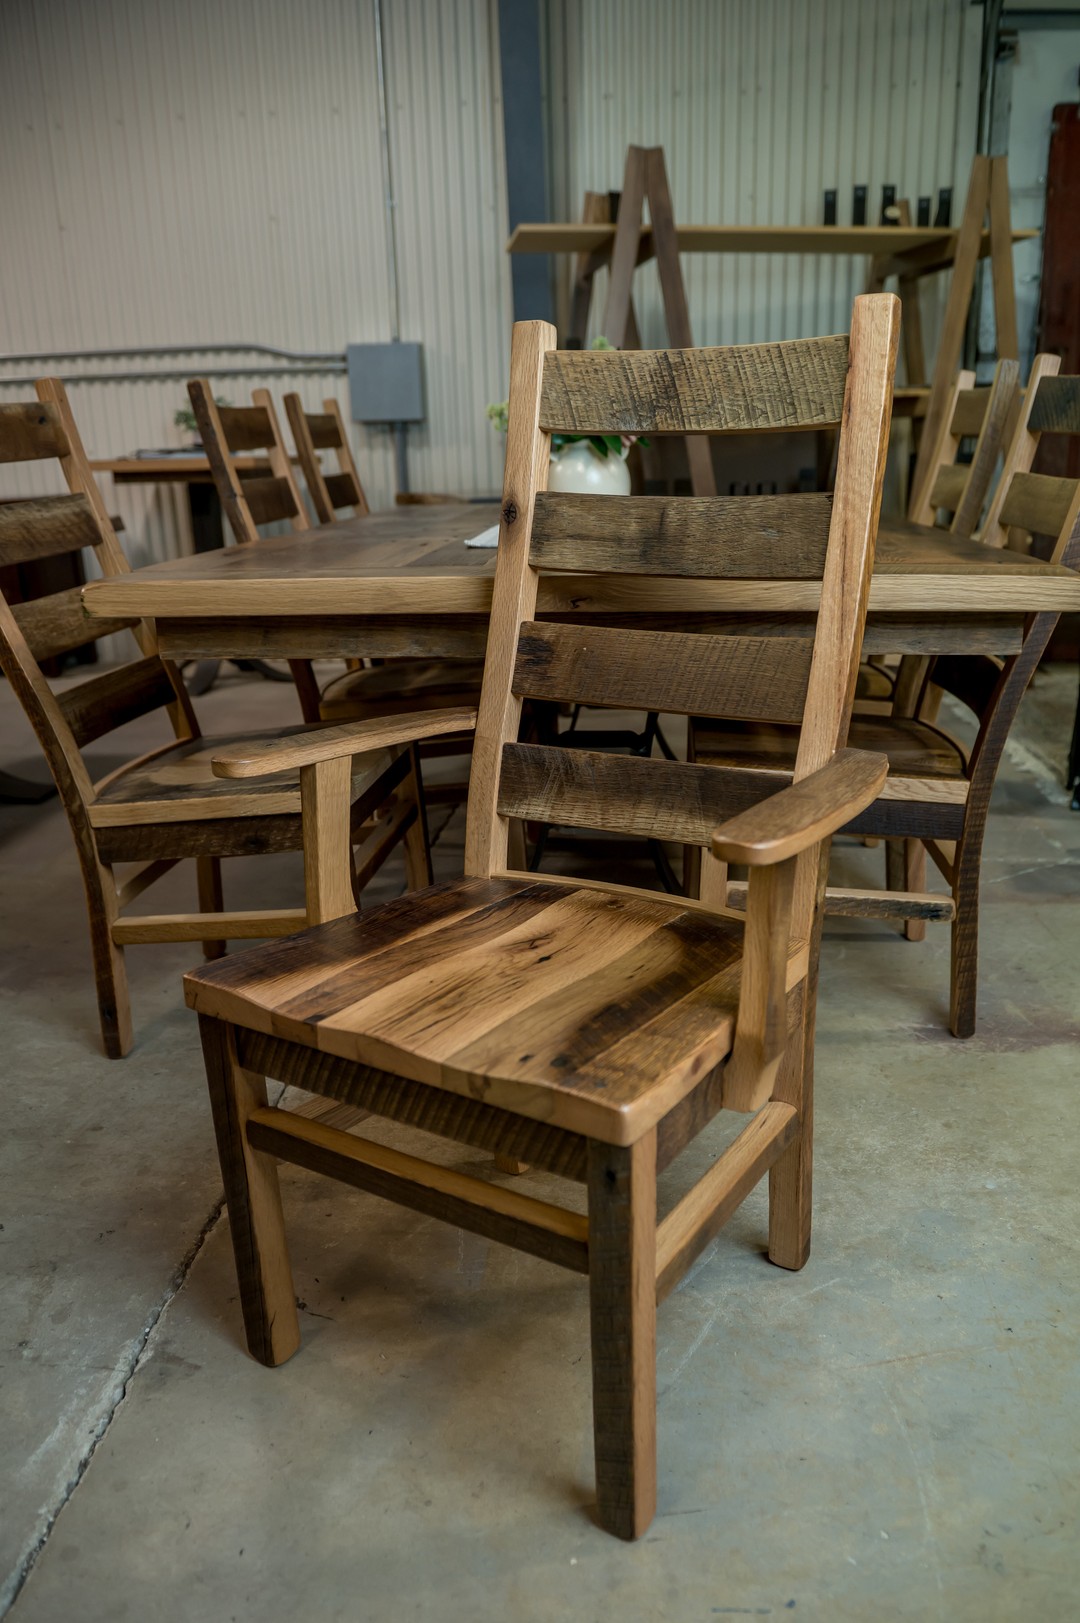 Rustic Dining Room Chairs, Reclaimed Wood